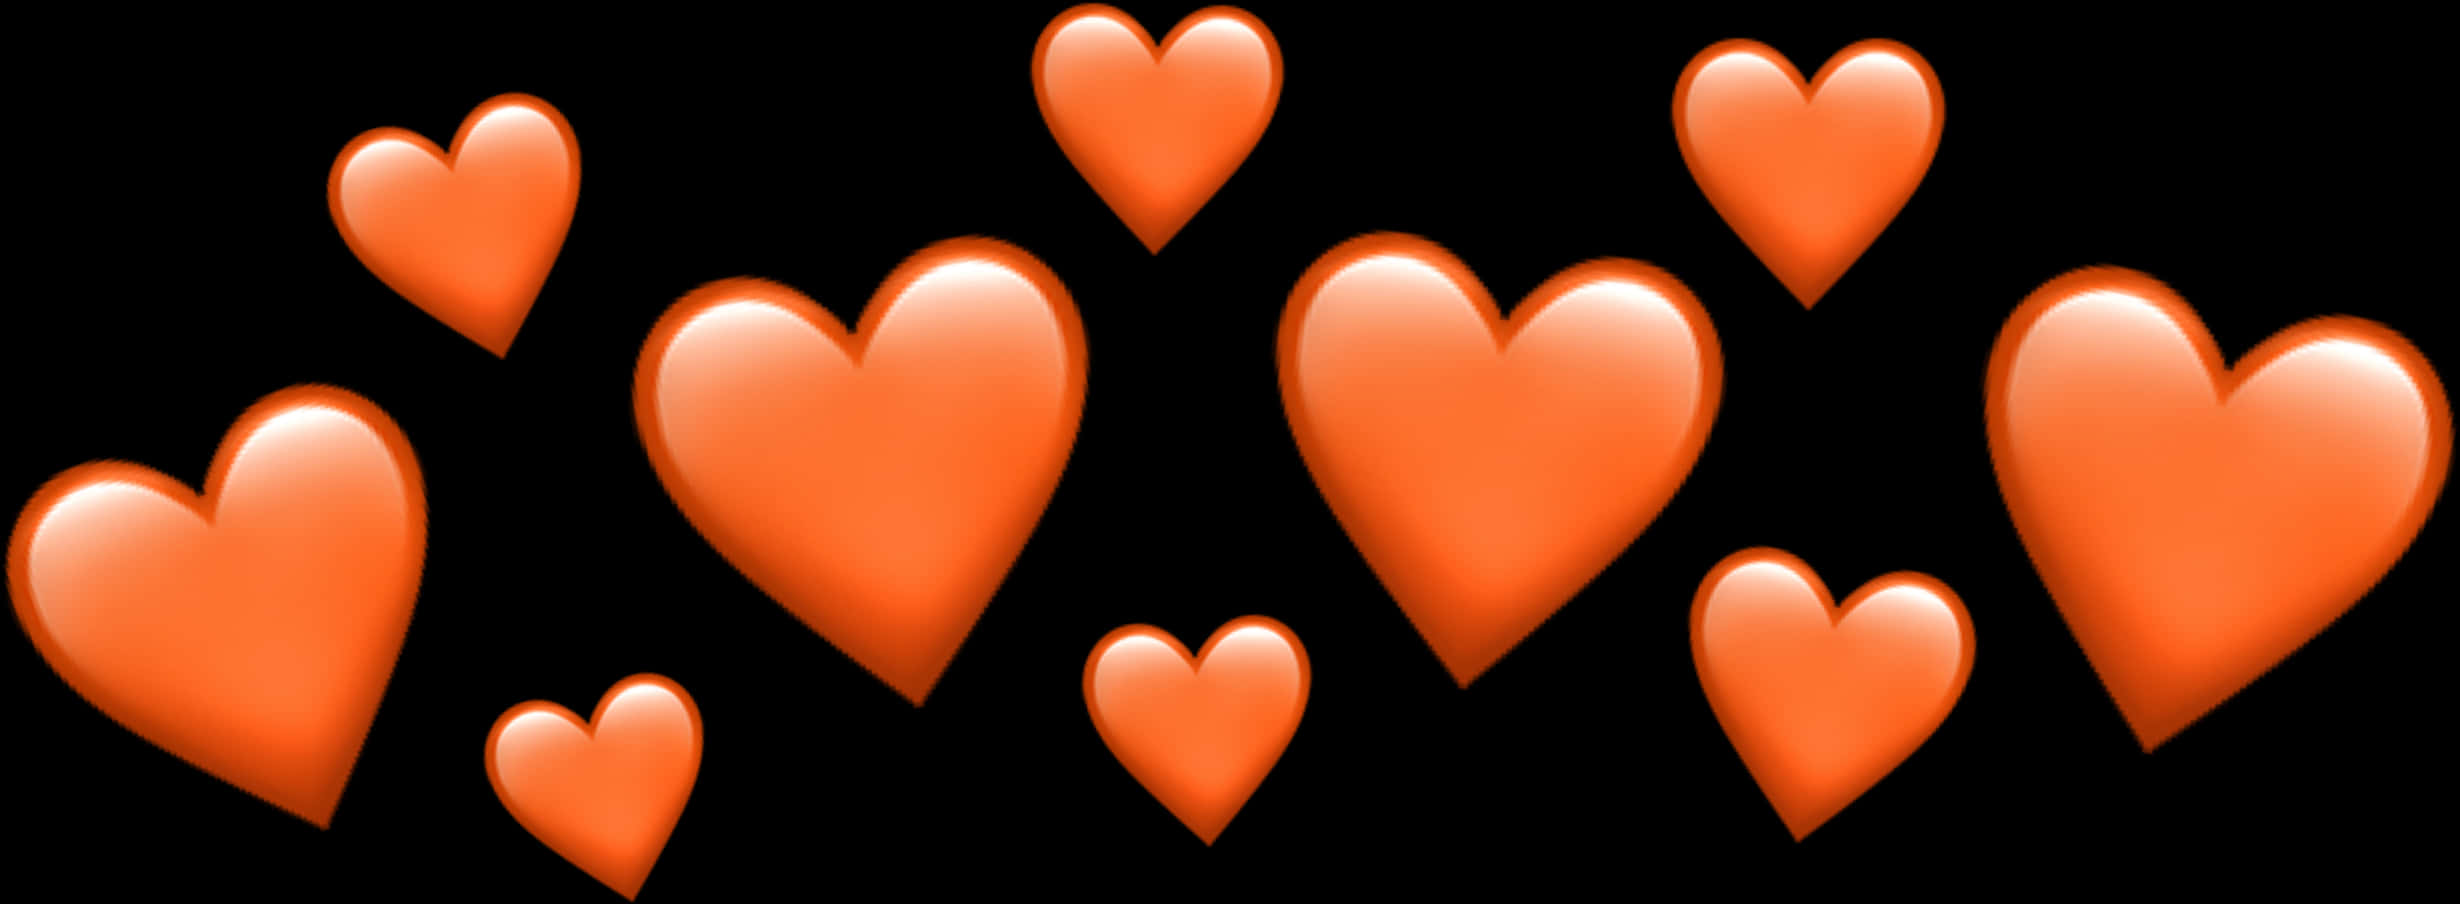 A Group Of Orange Hearts